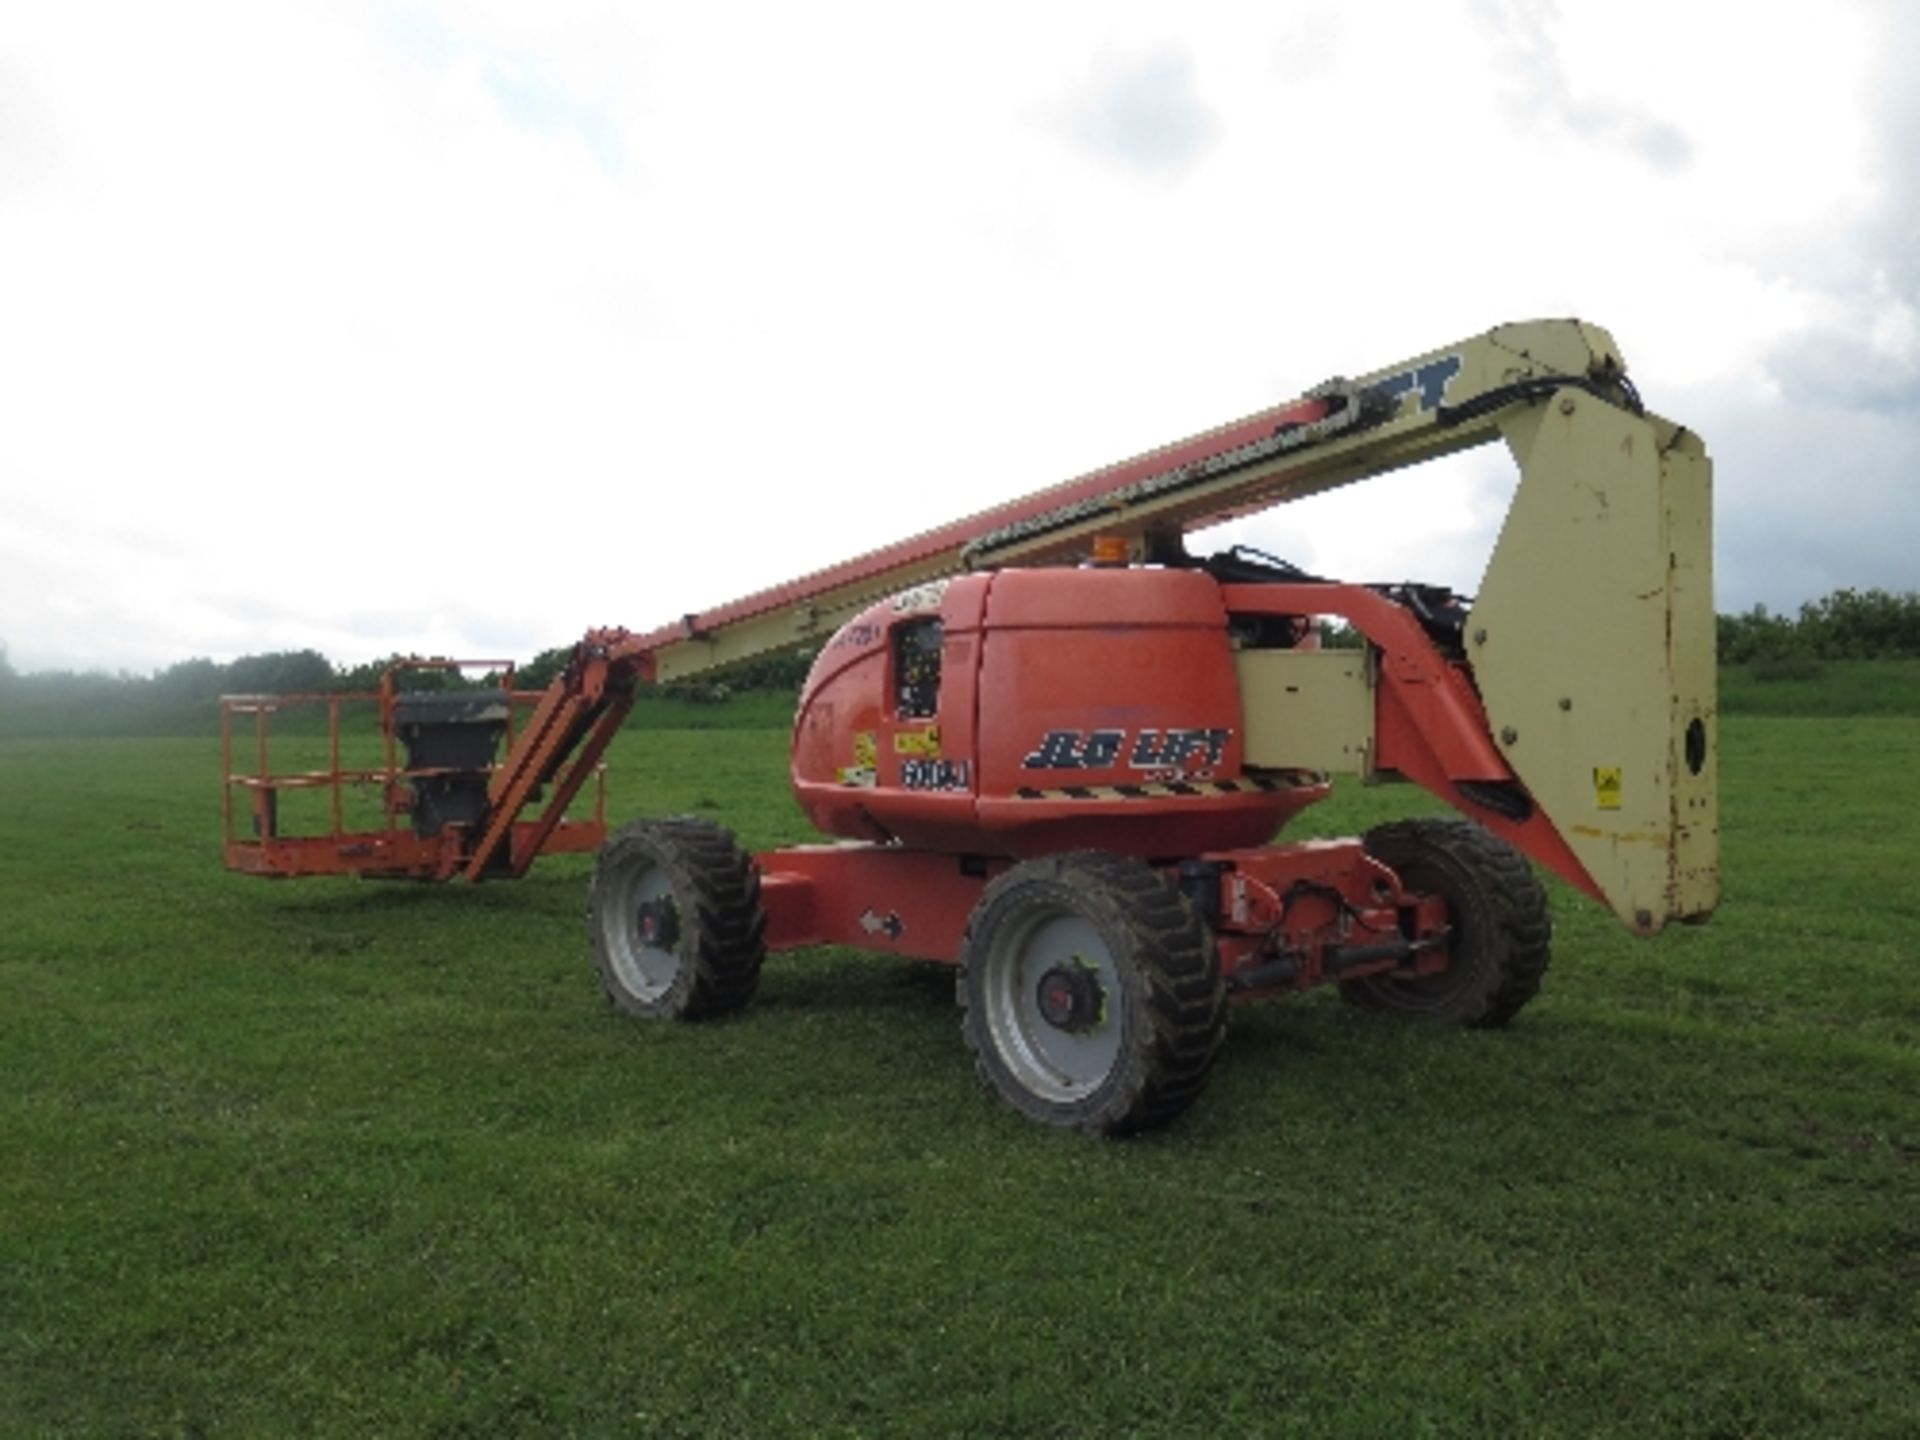 JLG 600AJ artic boom 2619 hrs 2006 147251ALL LOTS are SOLD AS SEEN WITHOUT WARRANTY expressed, given